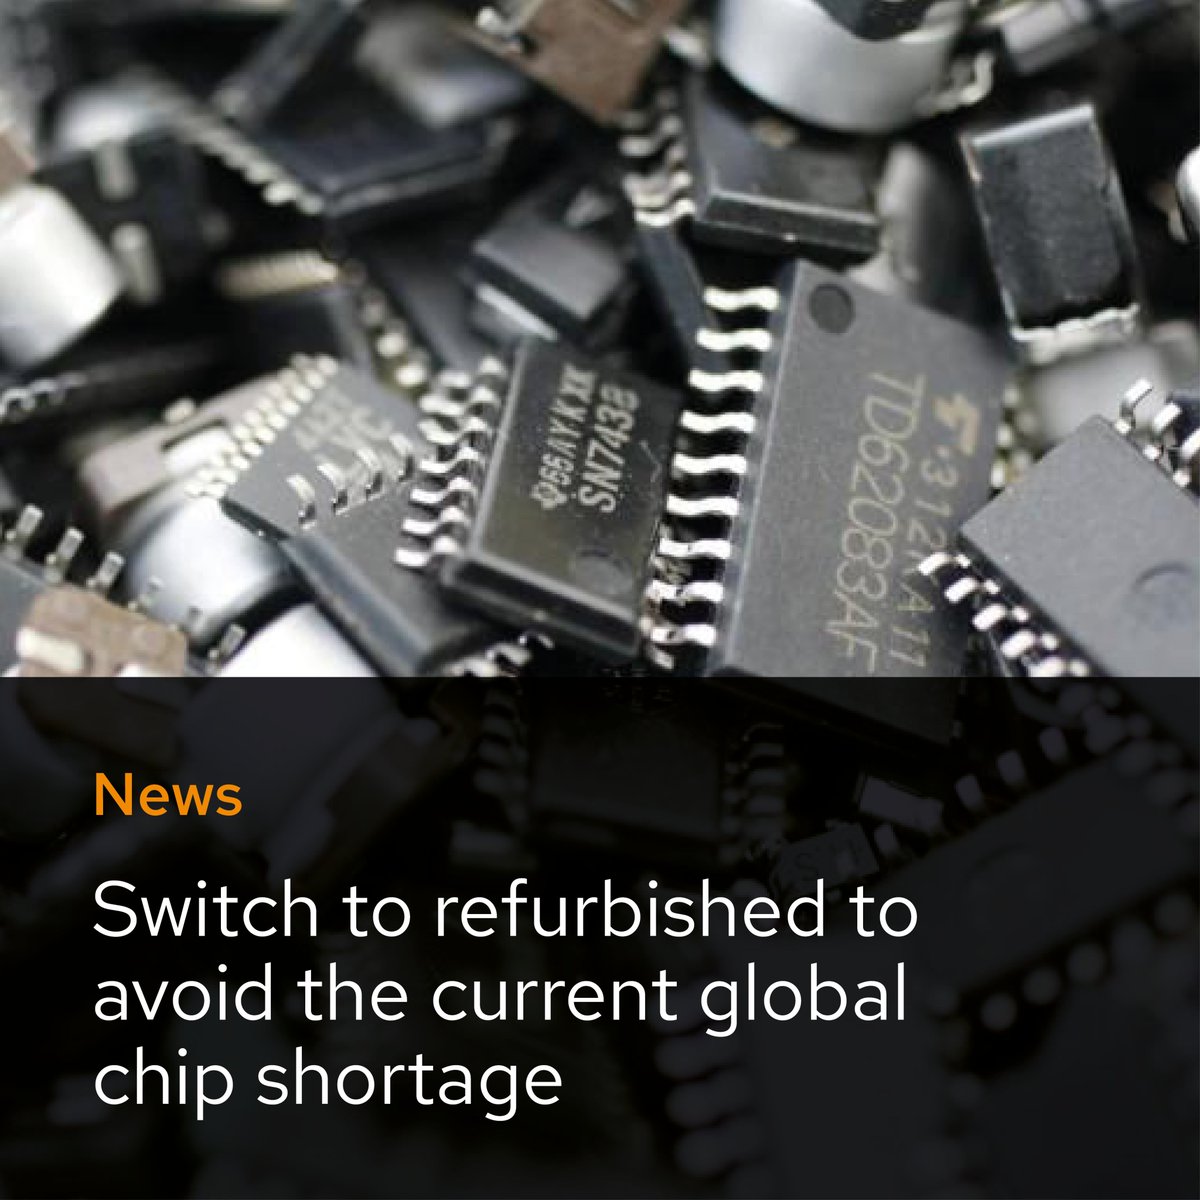 With the supply of chips unable to meet demand, switching to refurbished IT is the way forward. Find out more in our recent article: 
bit.ly/3sTAGjG

#refurbishedIT #refurbishedmac #refurbishedpc